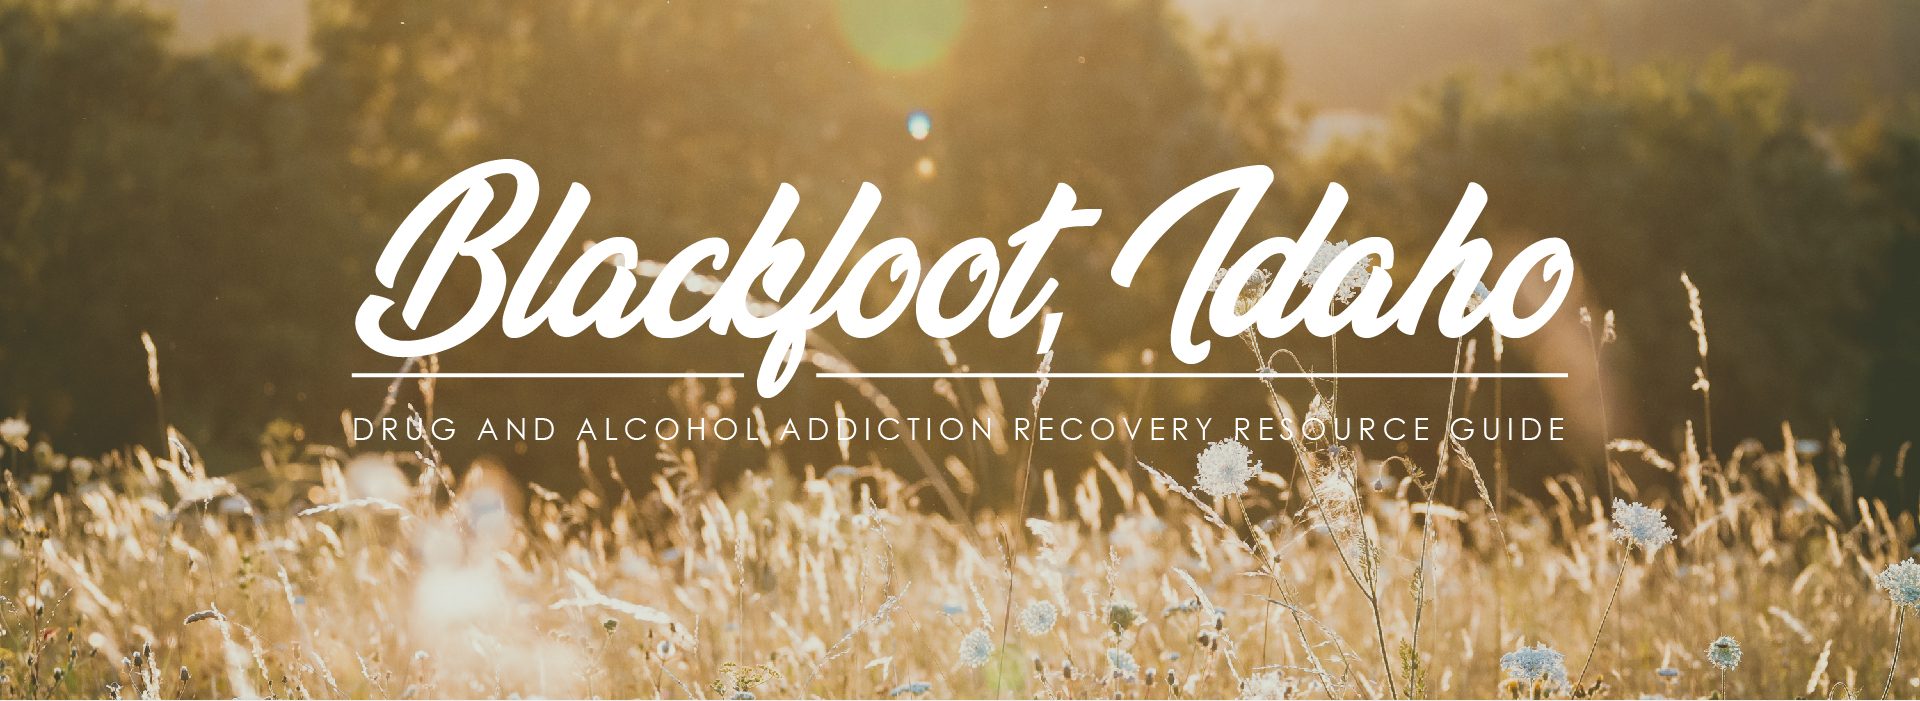 Blackfoot, Idaho, drug and alcohol addiction recovery resource guide